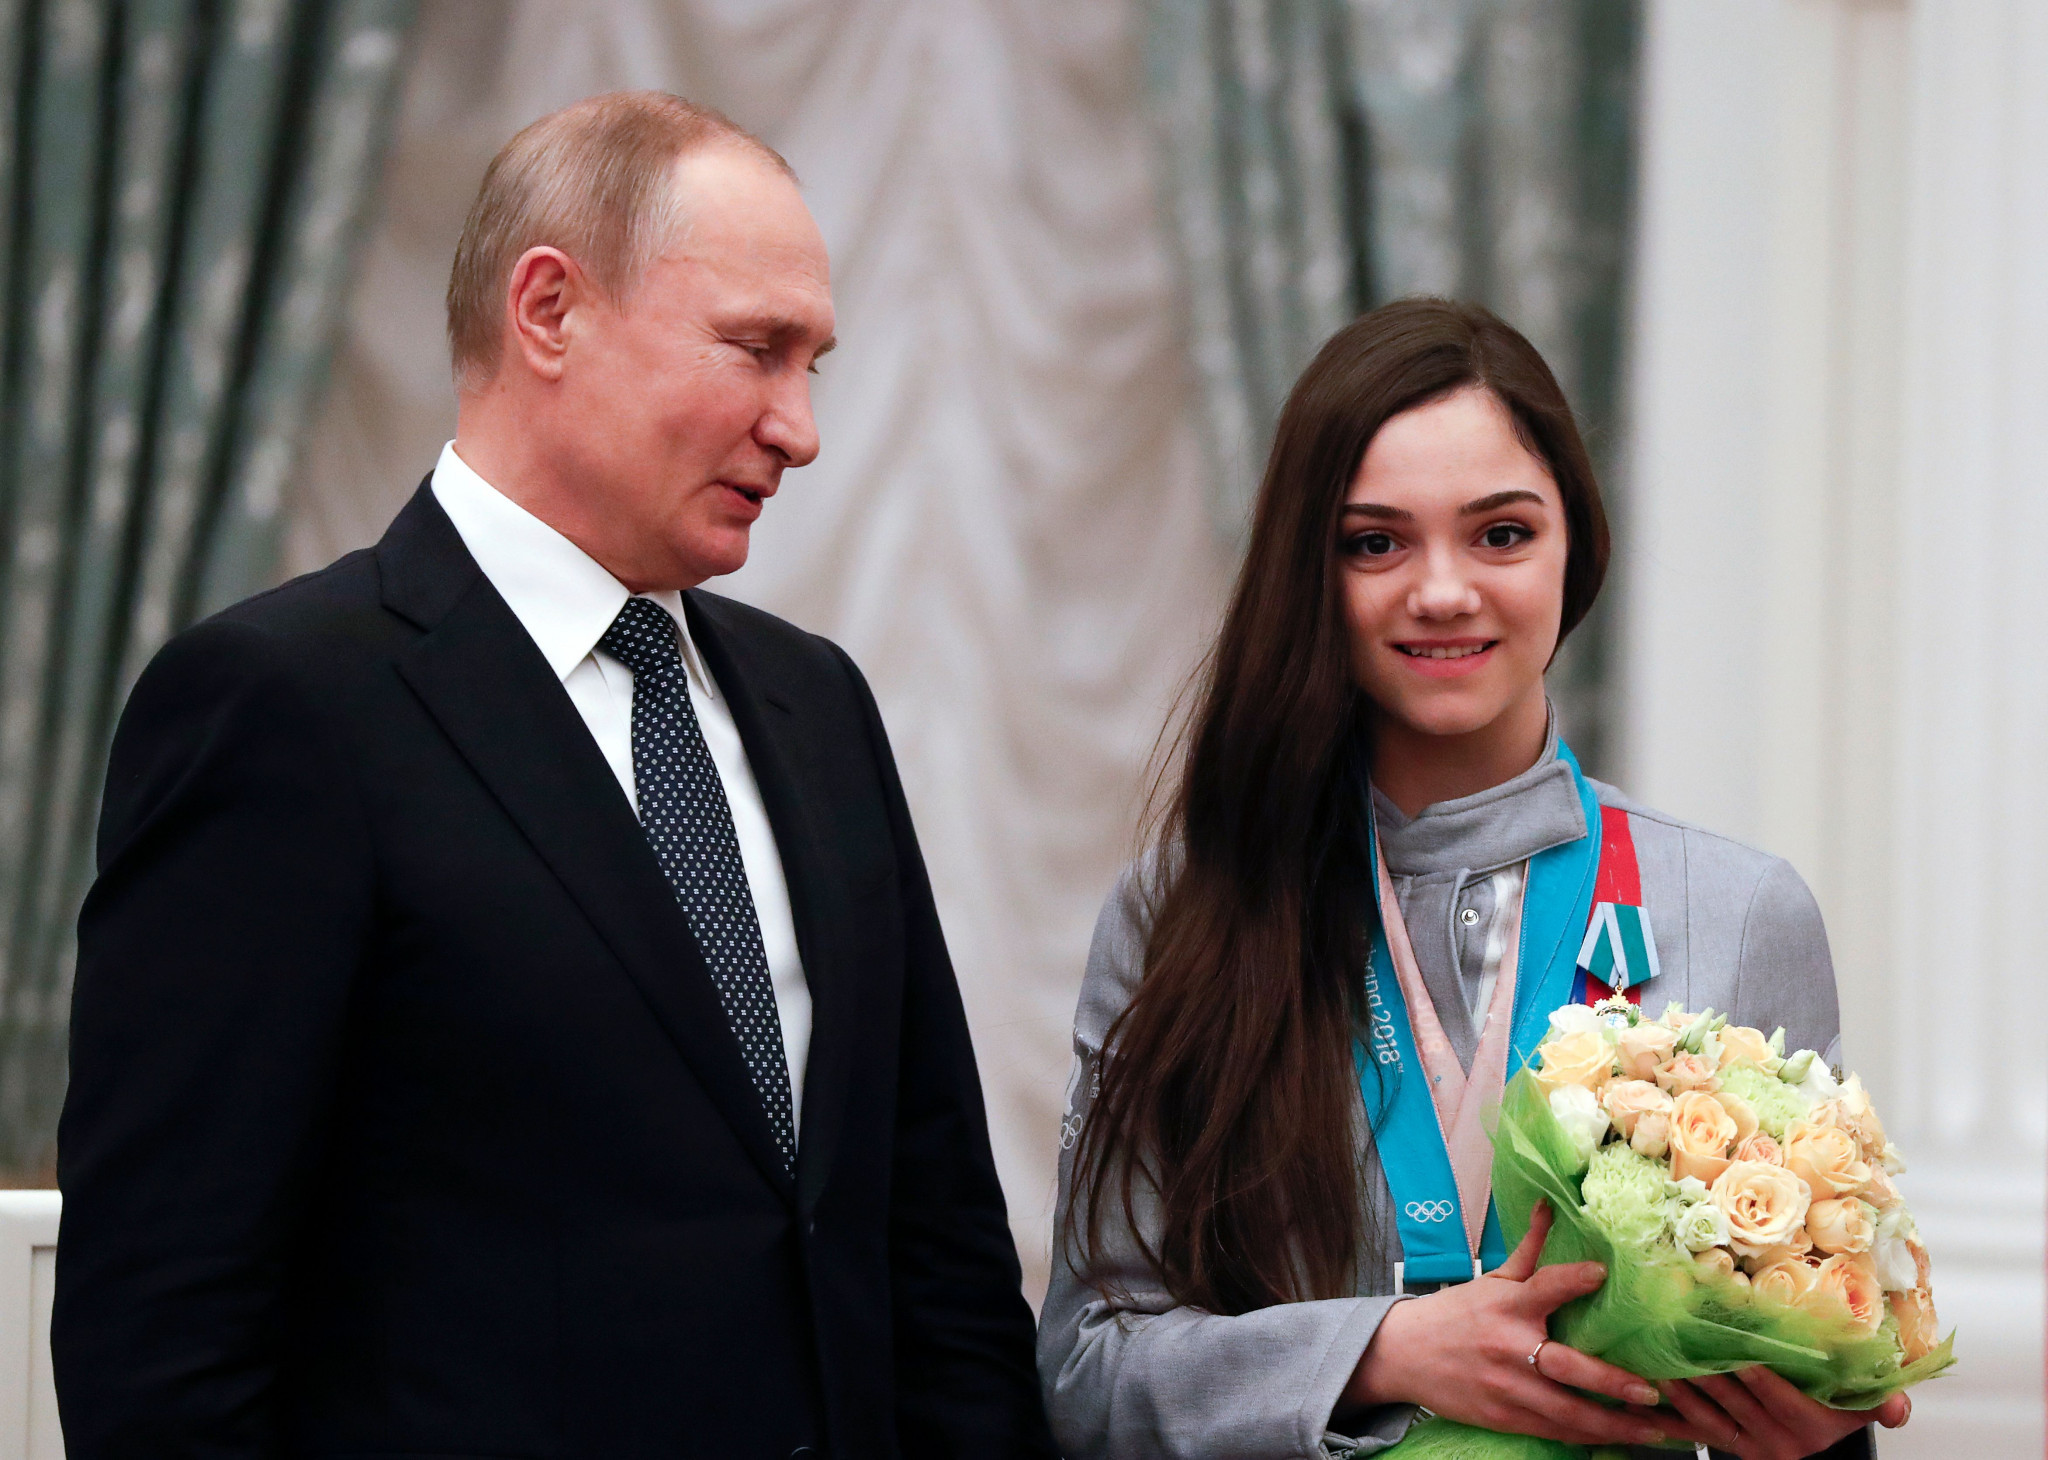 Evgenia Medvedeva, seen here with Russian President Vladimir Putin, spoke in support of the country before Pyeongchang 2018 ©Getty Images